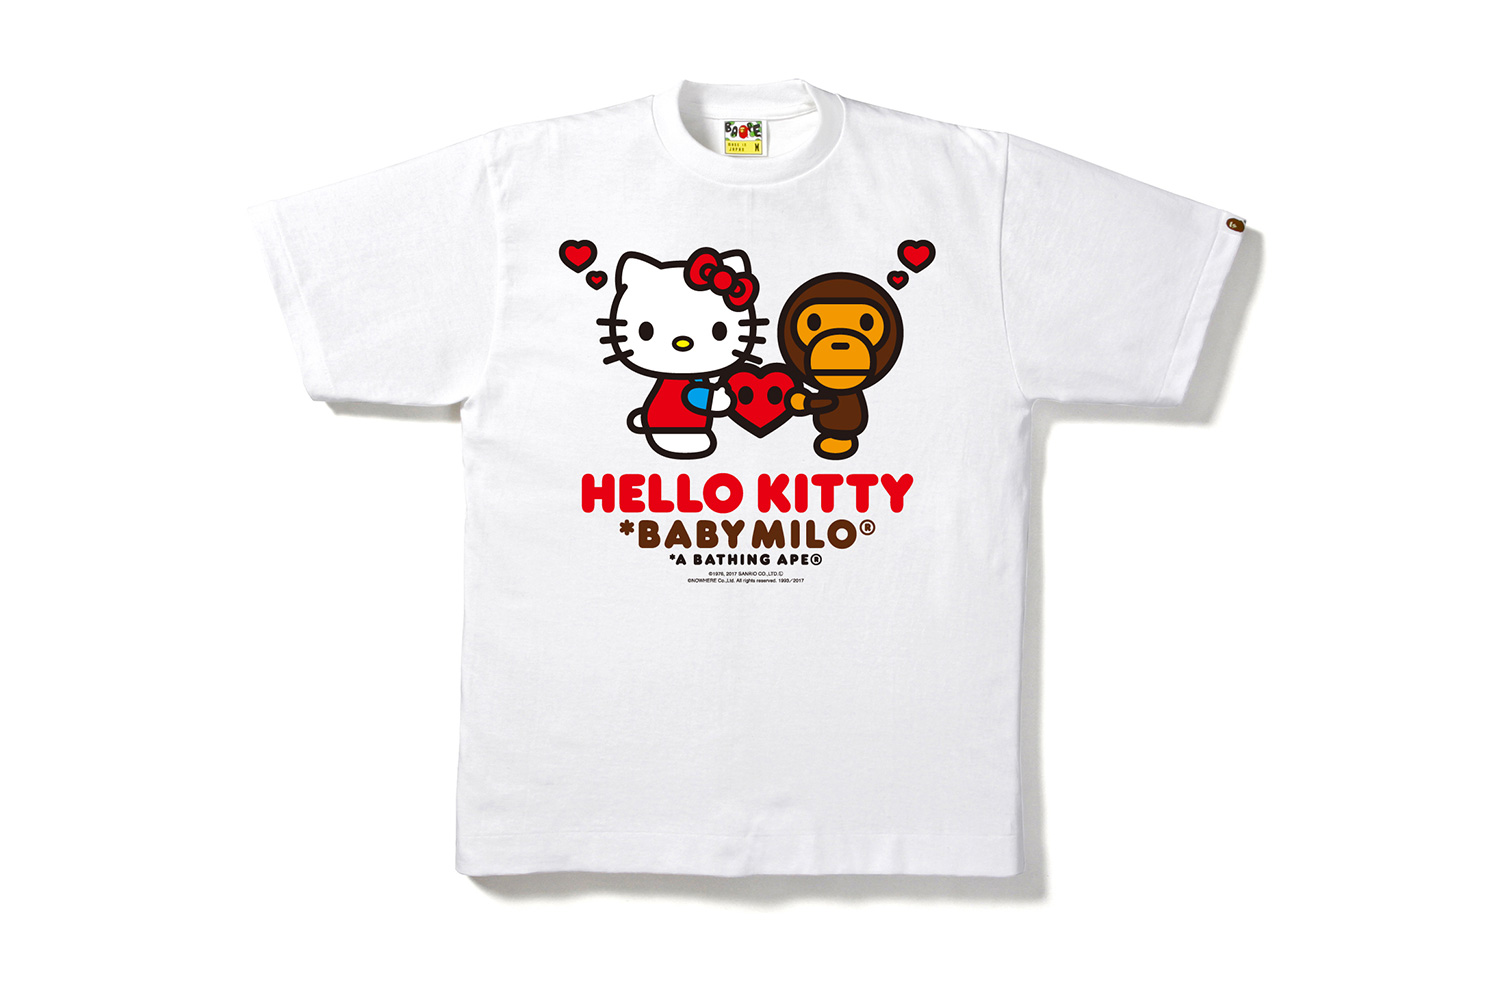 BAPE Teams Up With Sanrio for Valentines Day Collection | Sidewalk